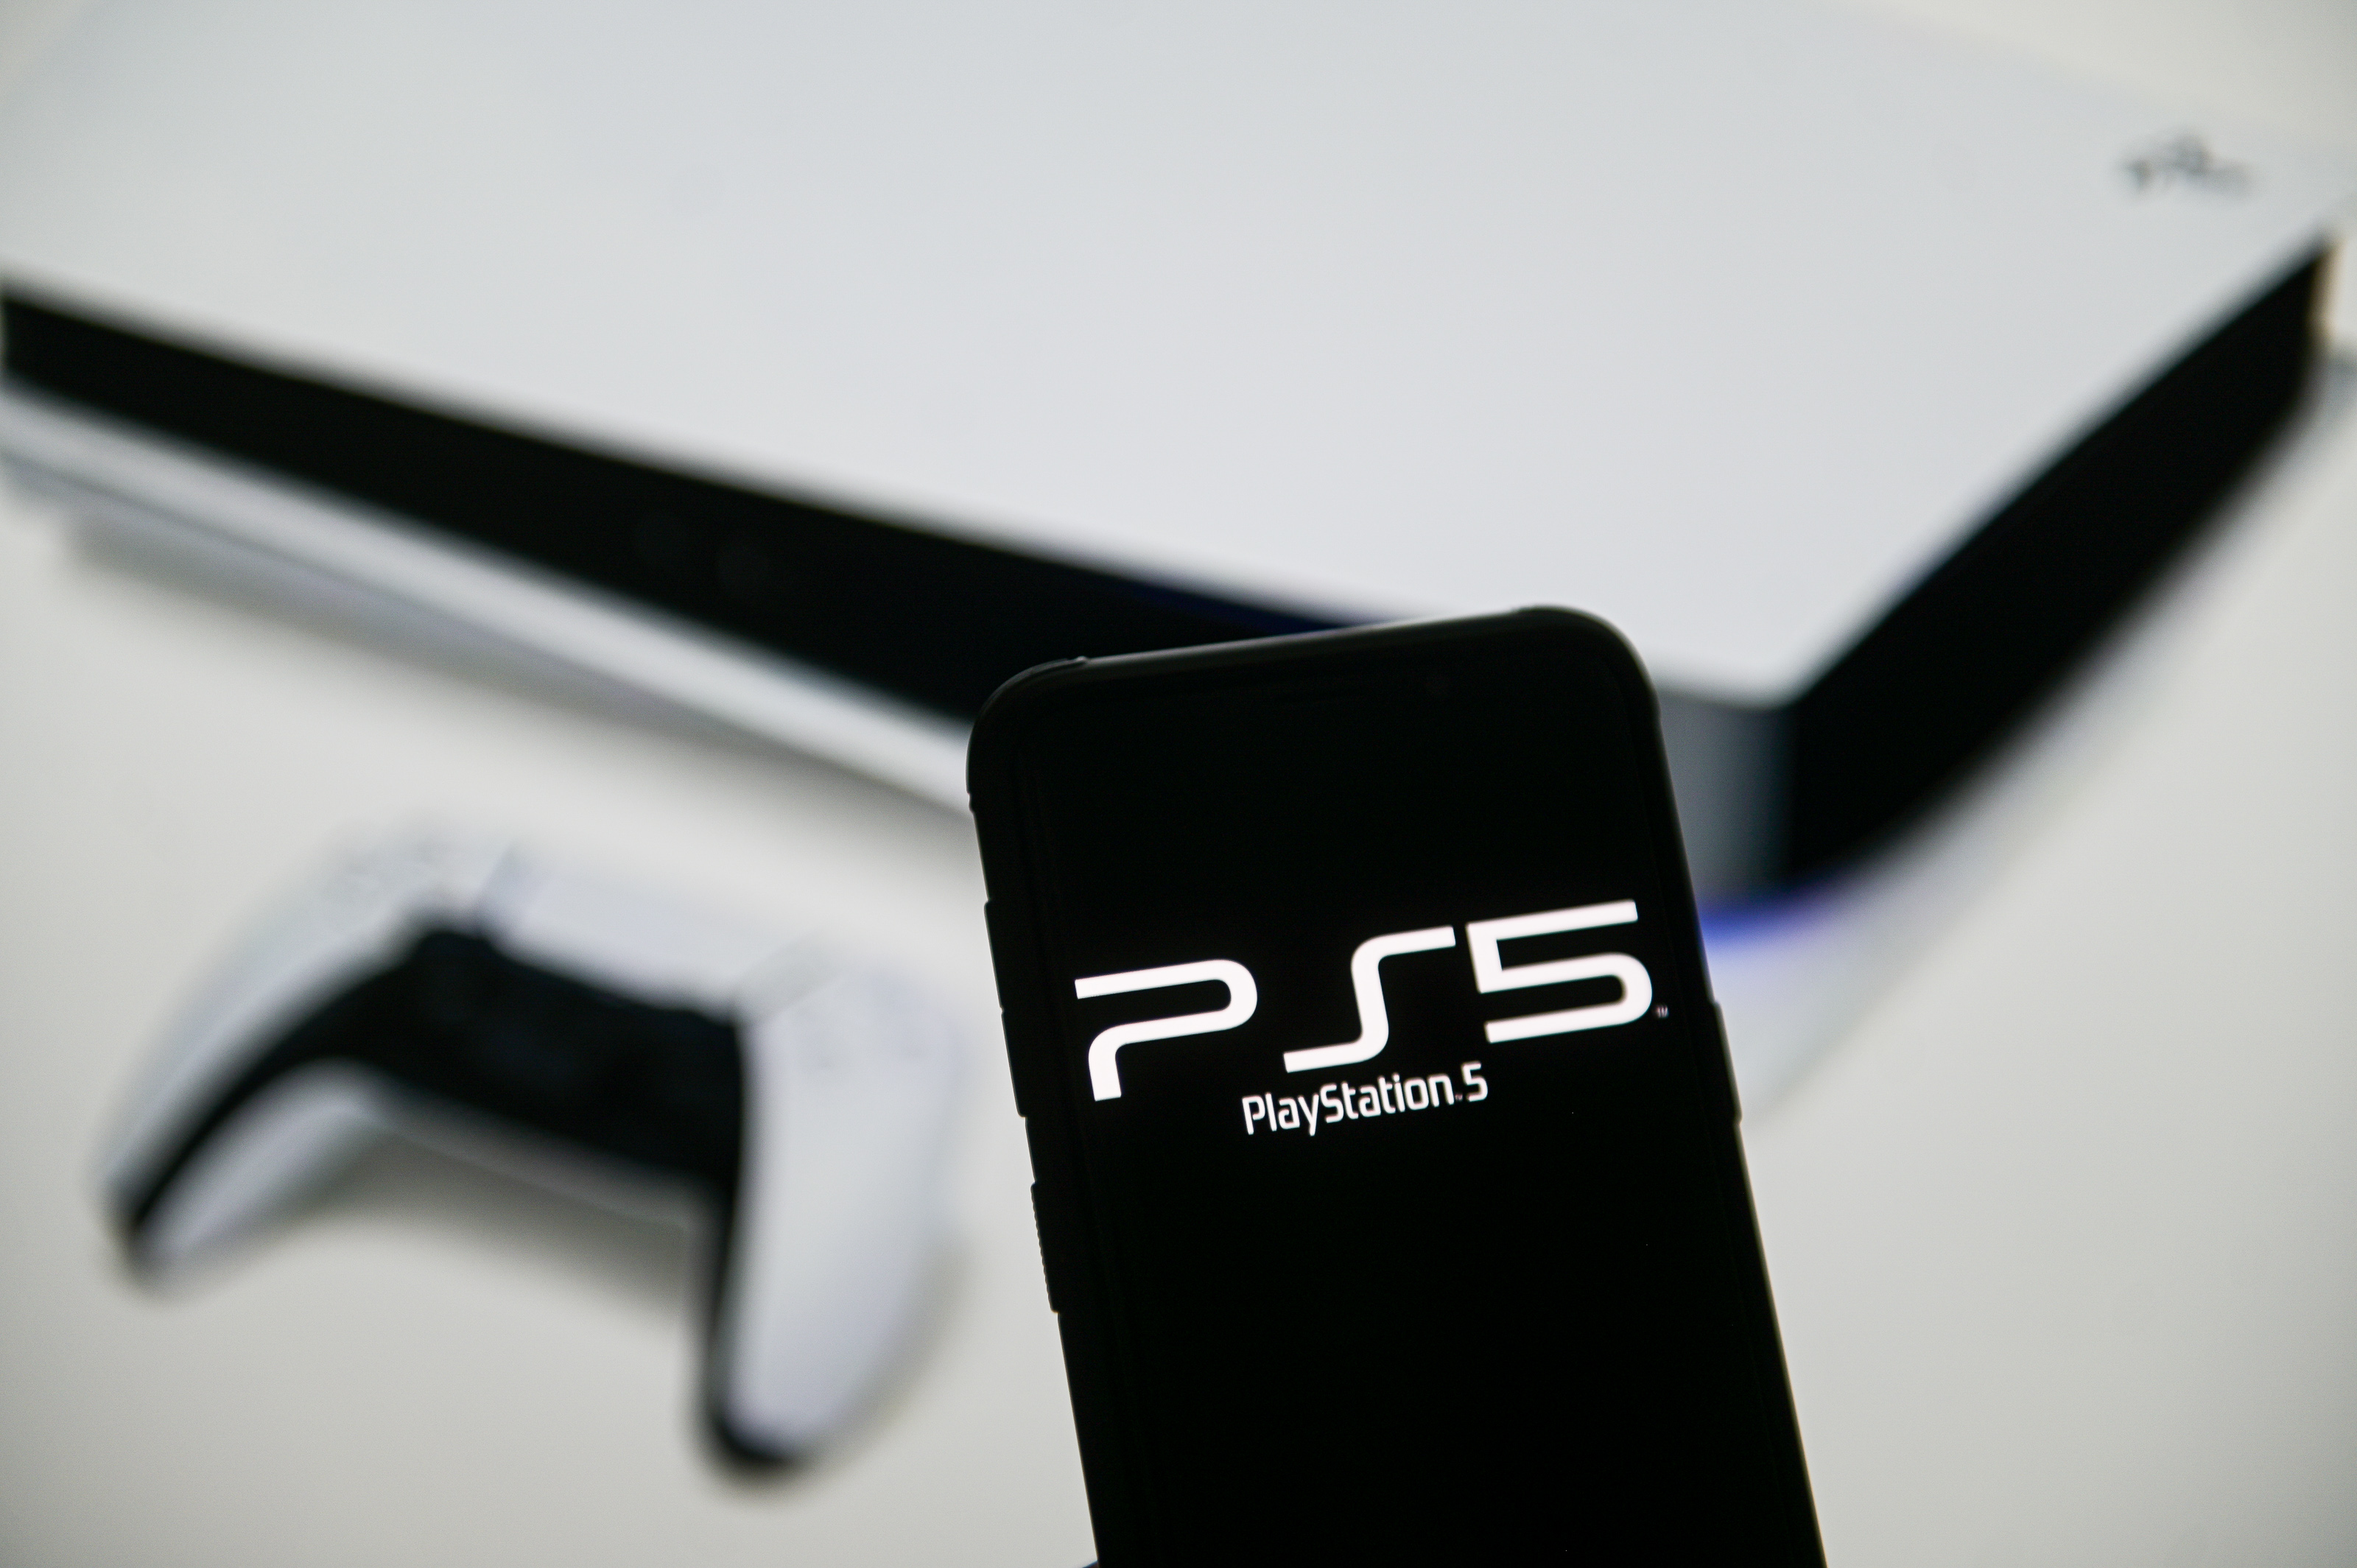 ps5 will not be backwards compatible